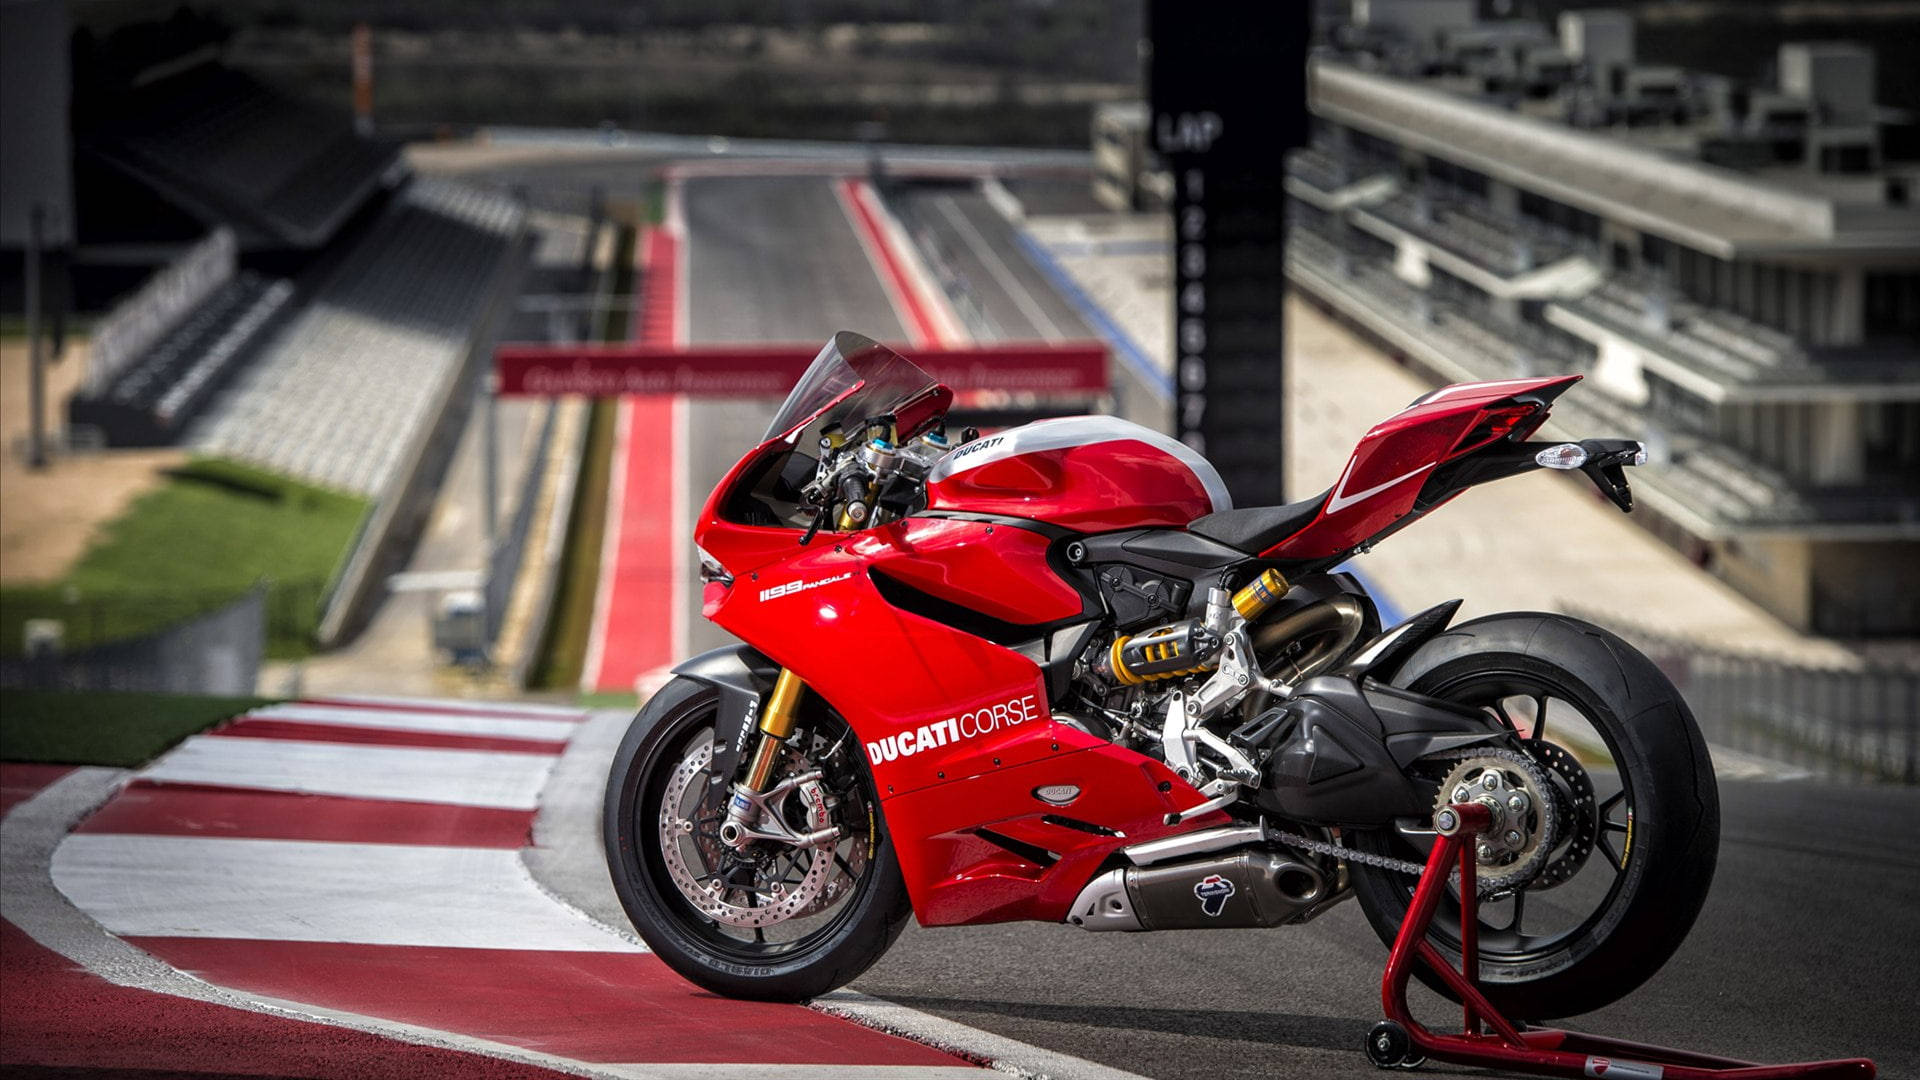 Parked Ducati 1199 Panigale R